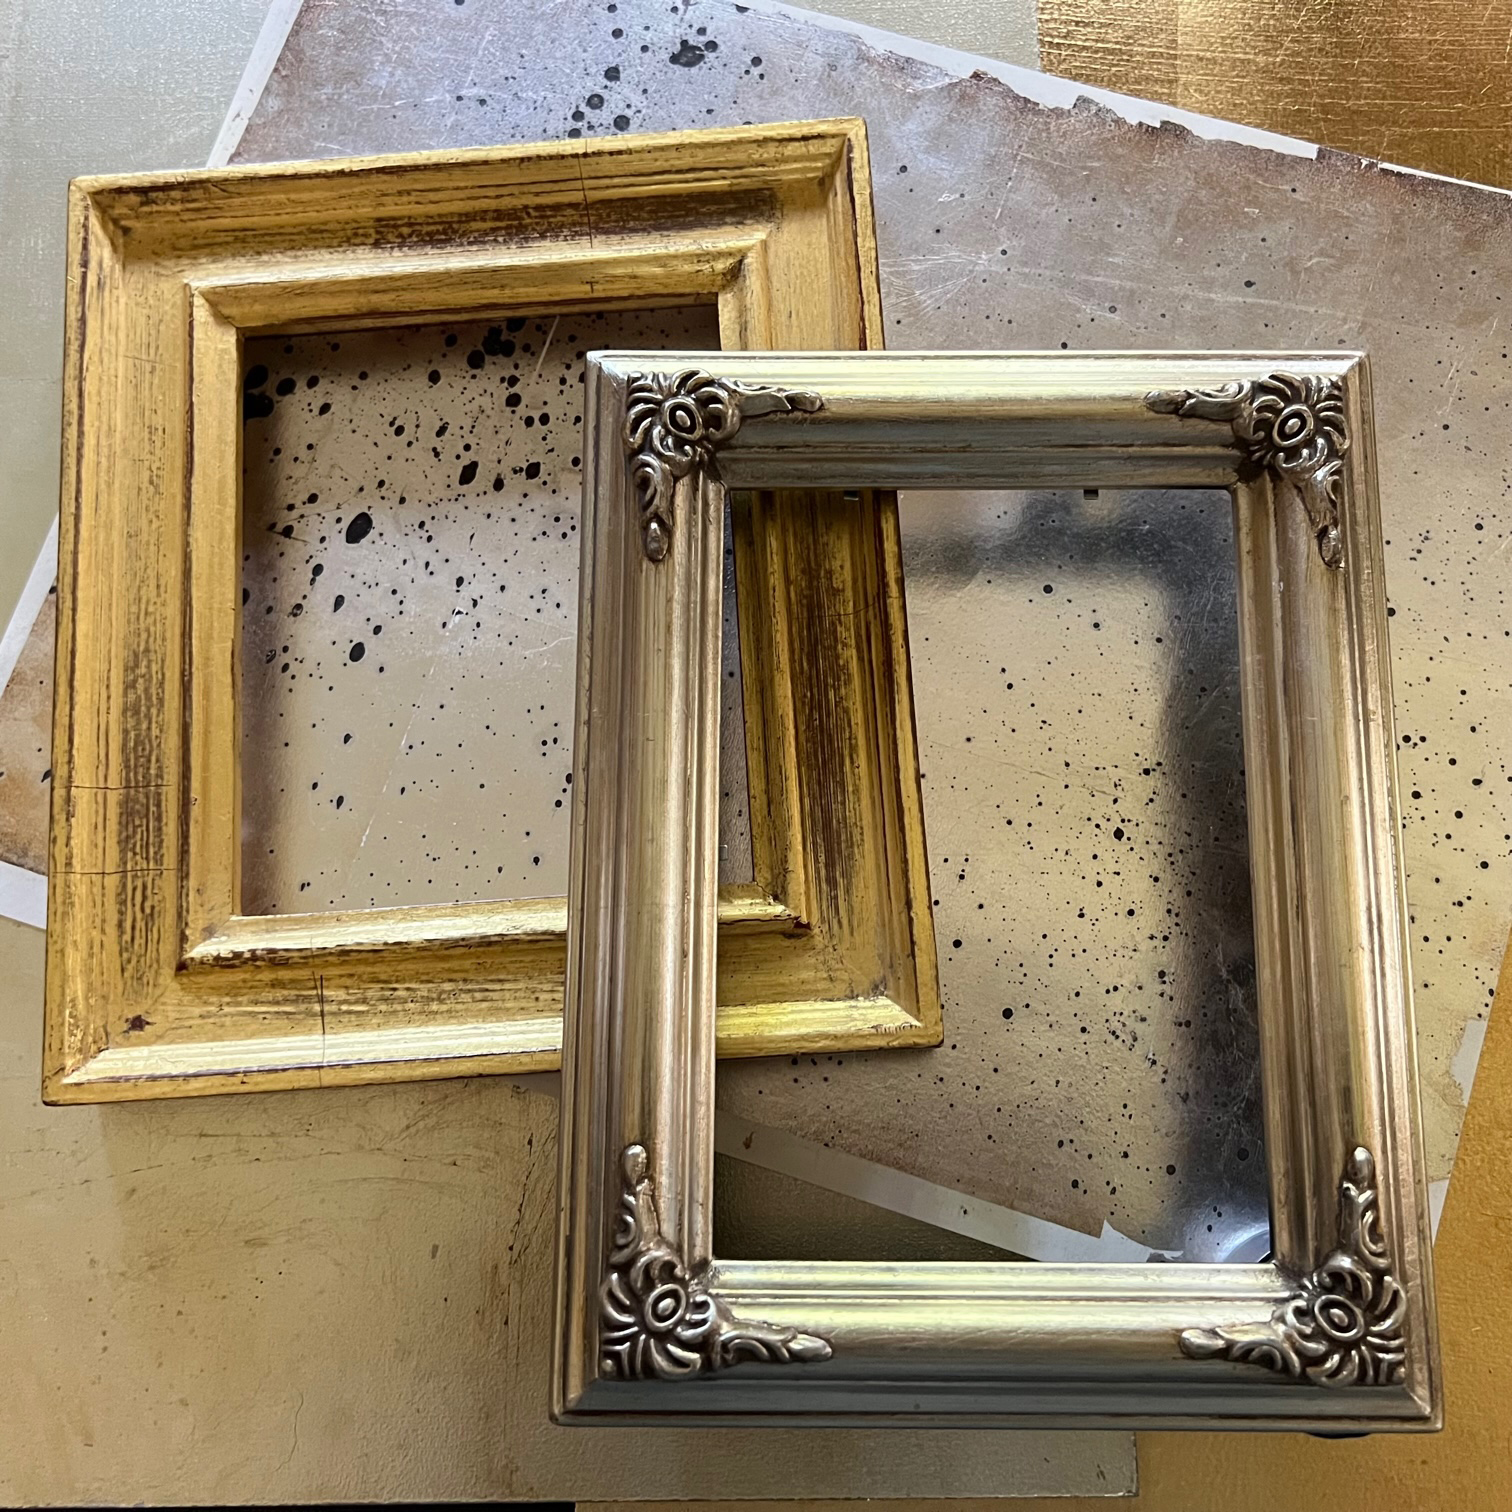 Gilding on Frames and Paper